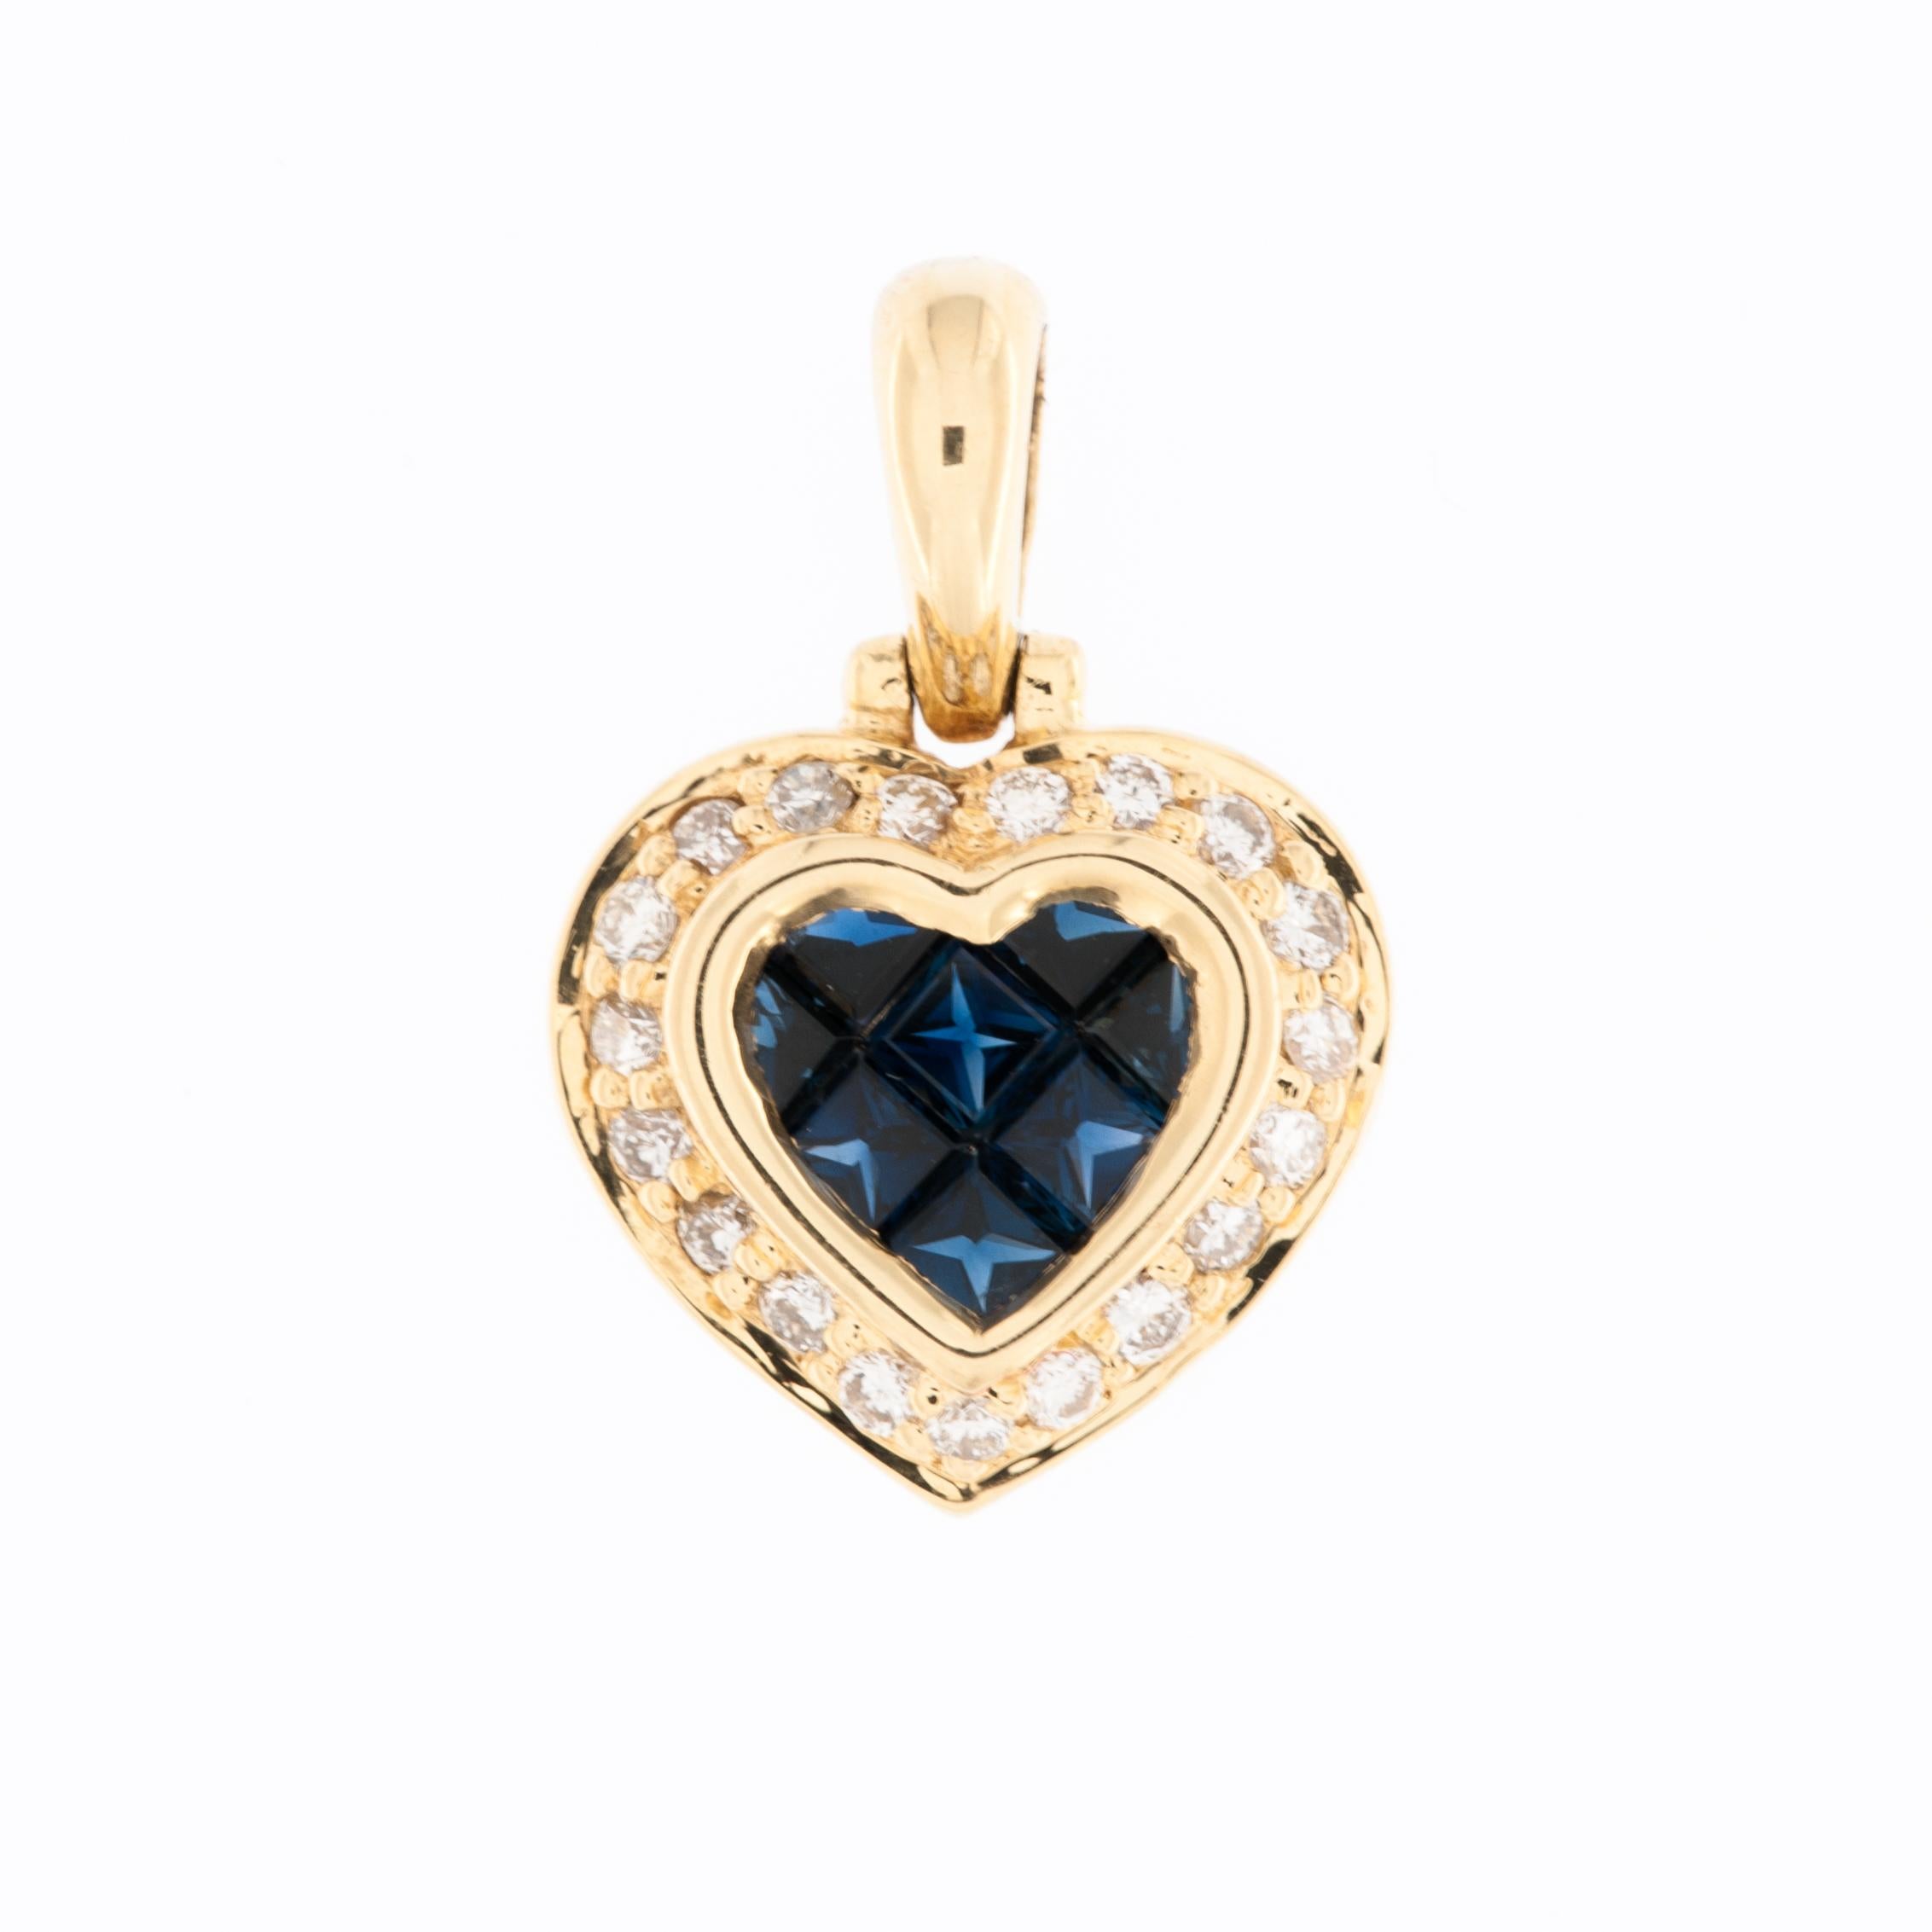 The Vintage French Diamonds and Sapphires Heart Pendant is a captivating and unique piece of jewelry that exudes charm and sophistication. Crafted in 18-karat yellow gold, this pendant features a stunning combination of brilliant cut diamonds and